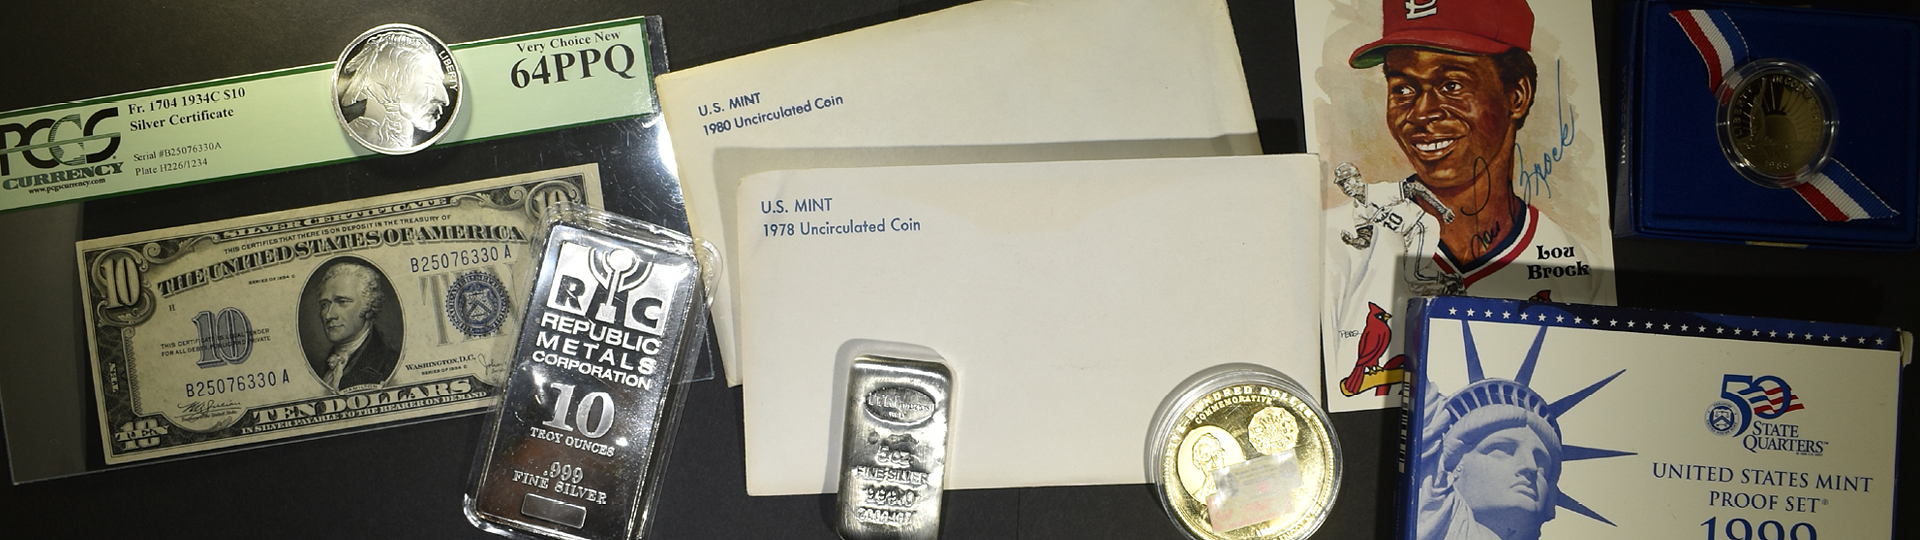 March 14th Silver City Rare Coins & Sports by Silver City Auctions